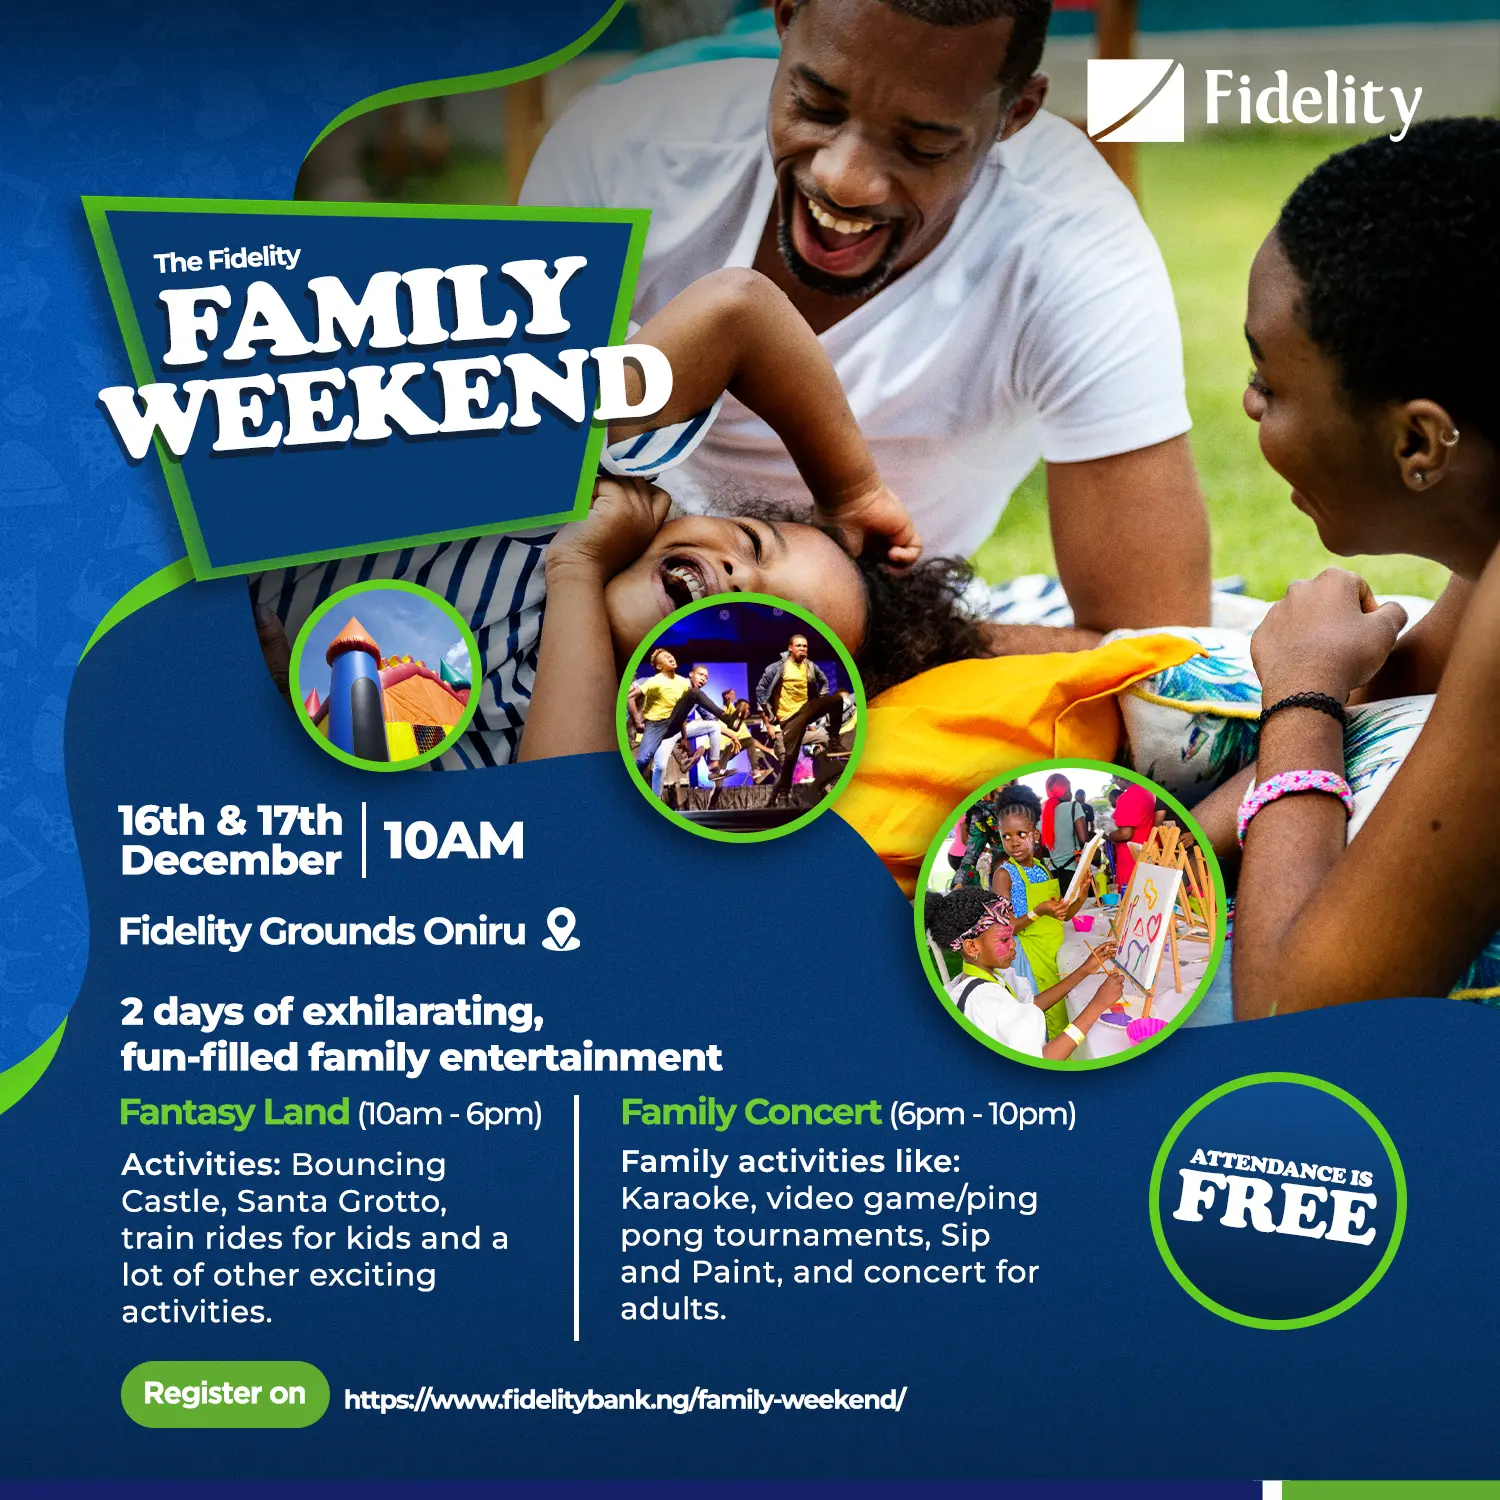 Fidelity Bank to hold trade expo in Texas